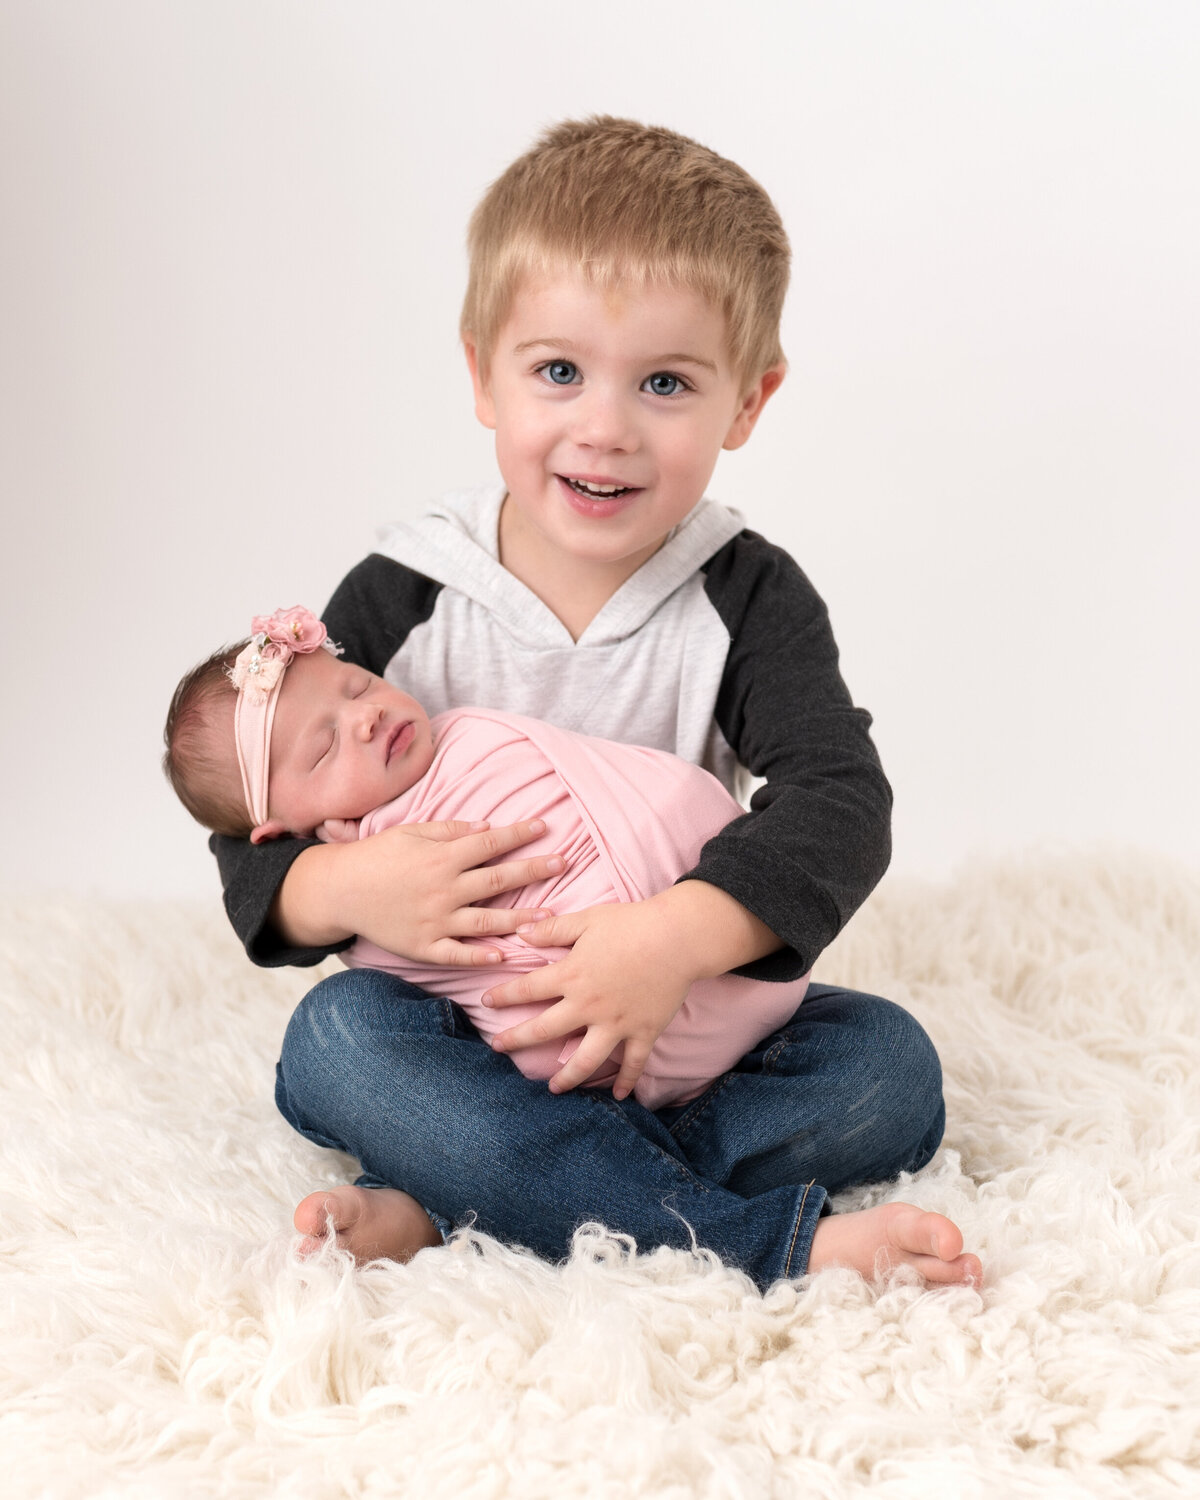 Sibling and Newborn Photoshoot in Furry background